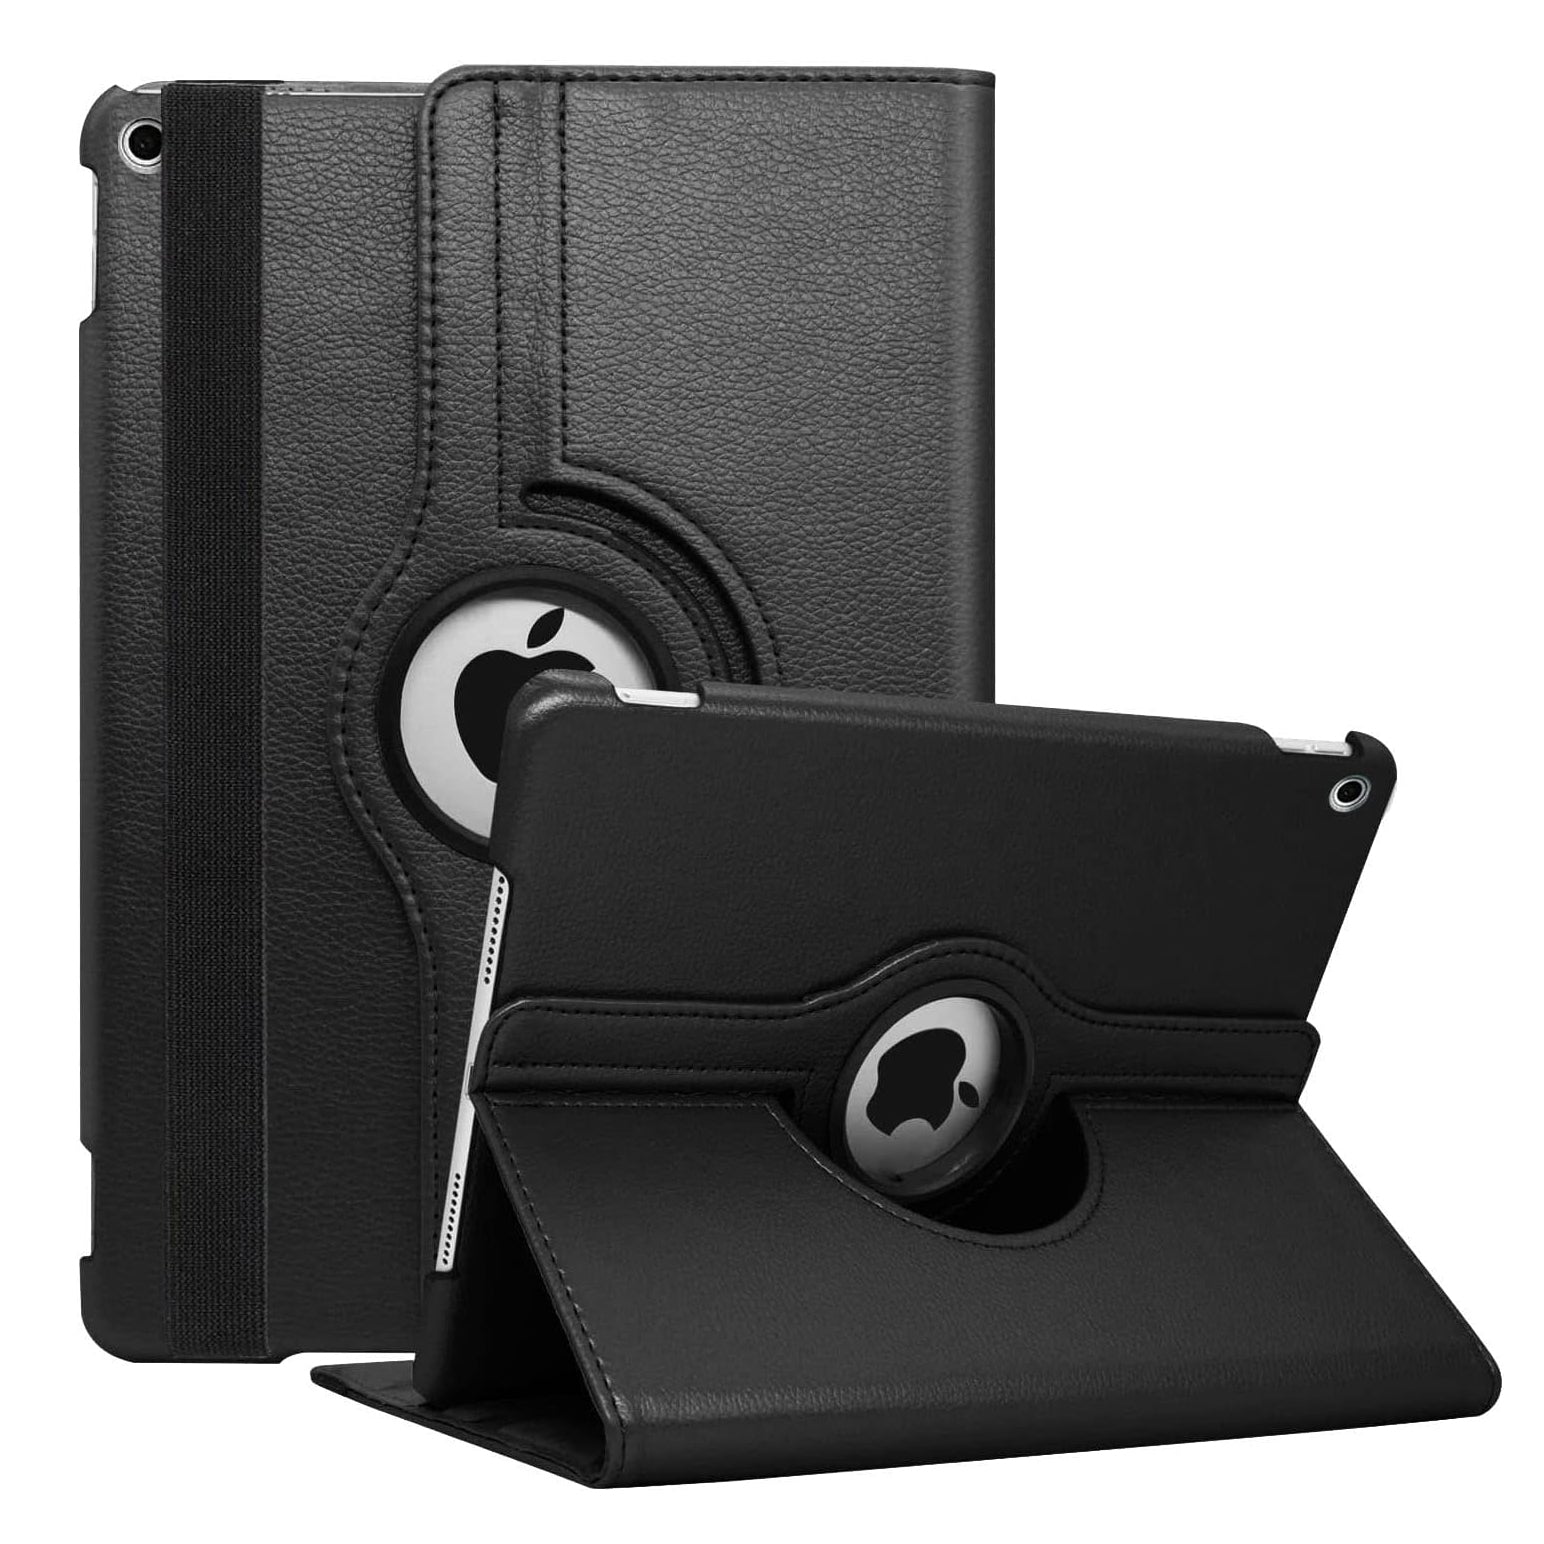 For Apple iPad Air 3 10.5" 2019 Tablet Case 360° Rotating PU Leather Cover - Black